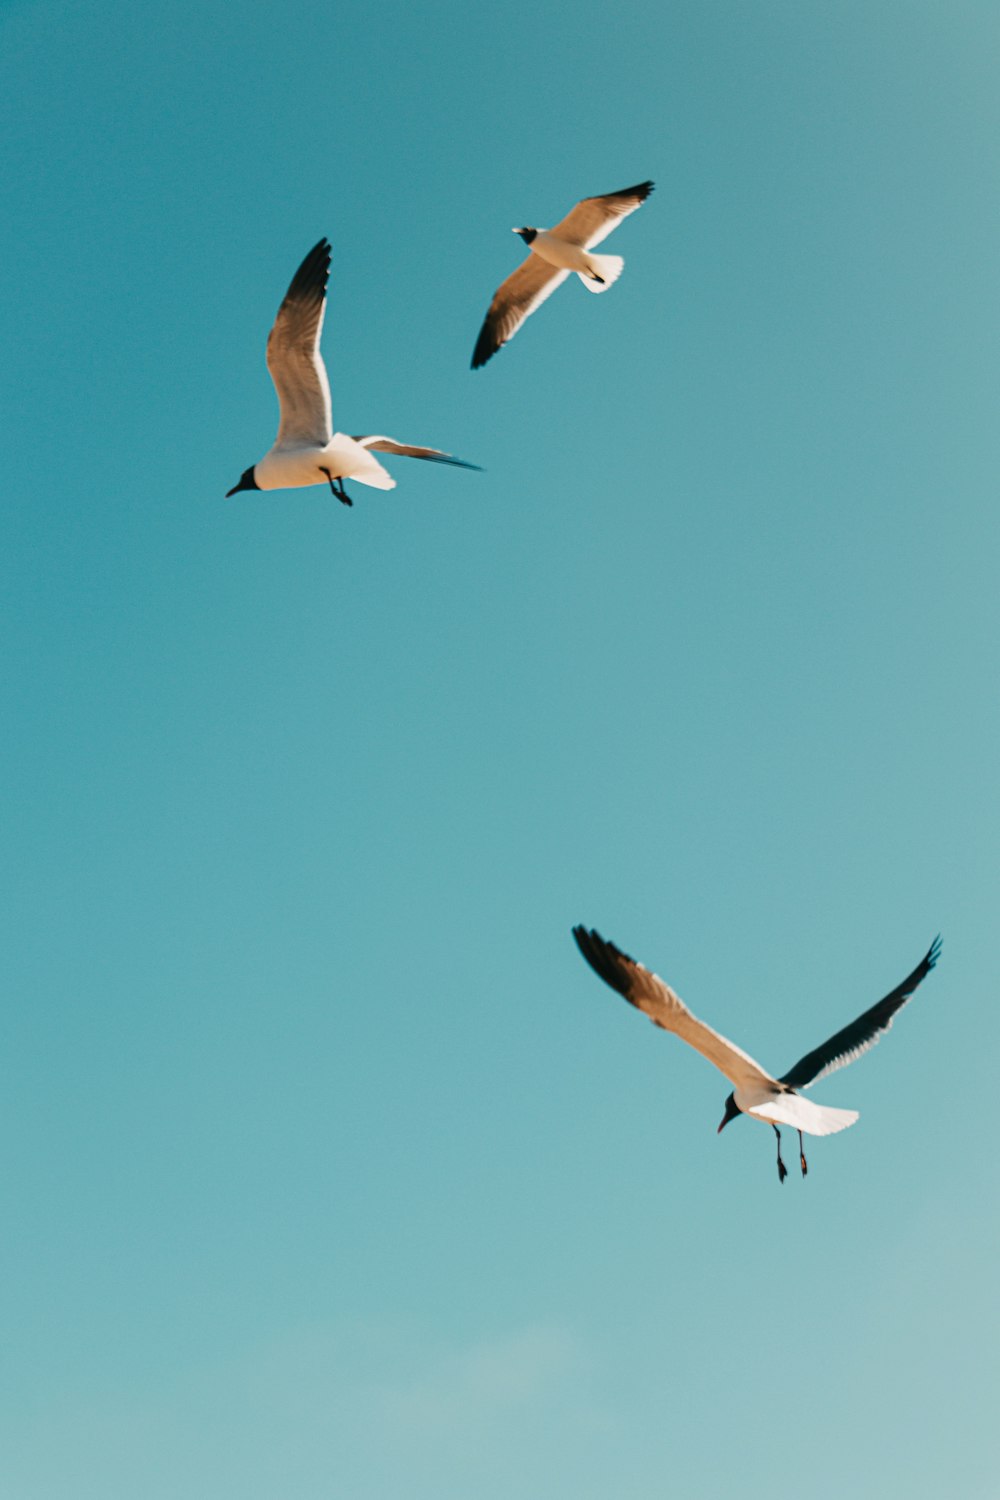 500+ Bird Pictures [HD] | Download Free Images on Unsplash